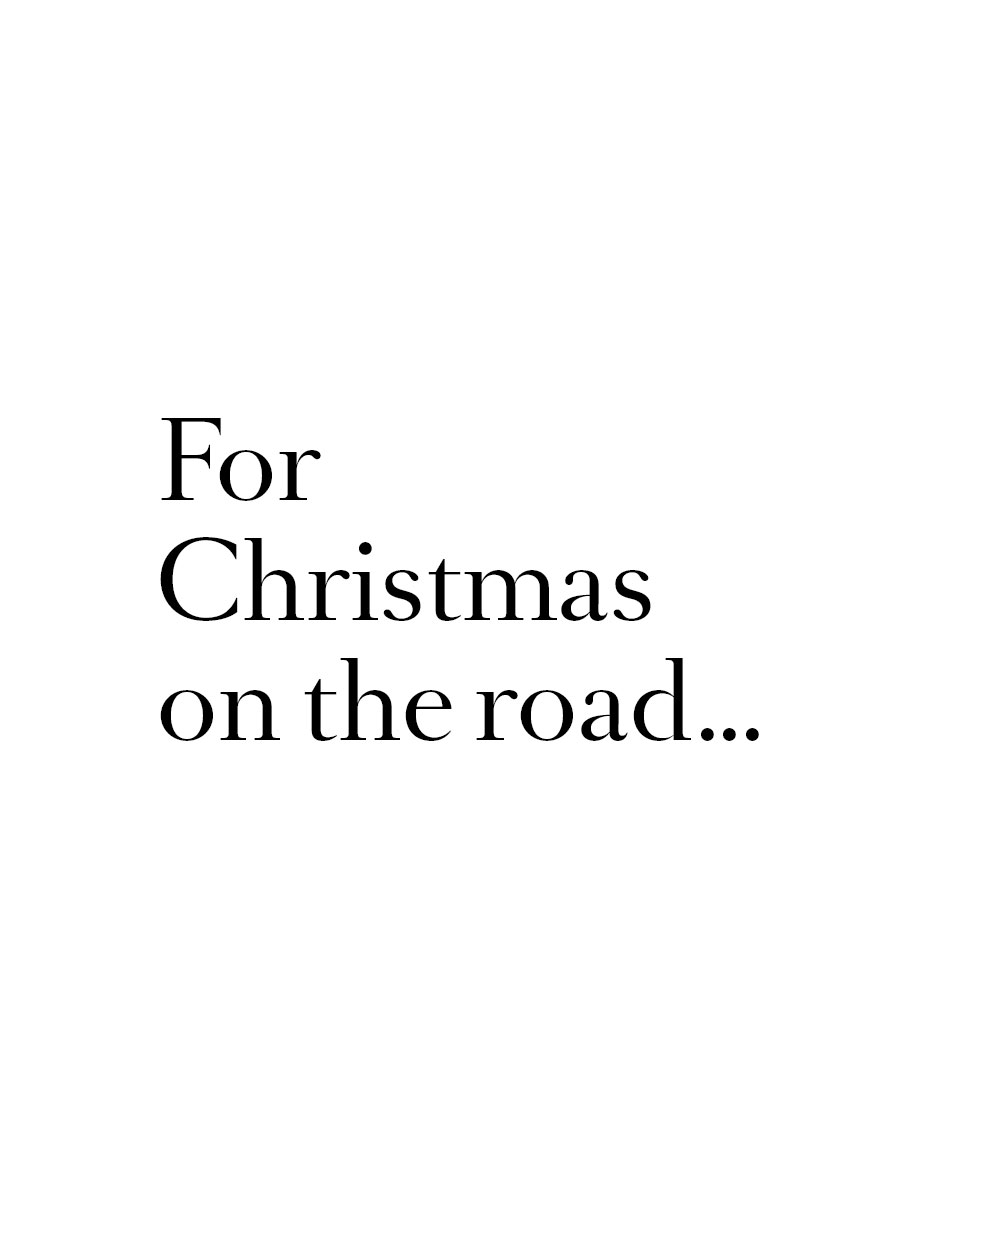 For Christmas on the road...